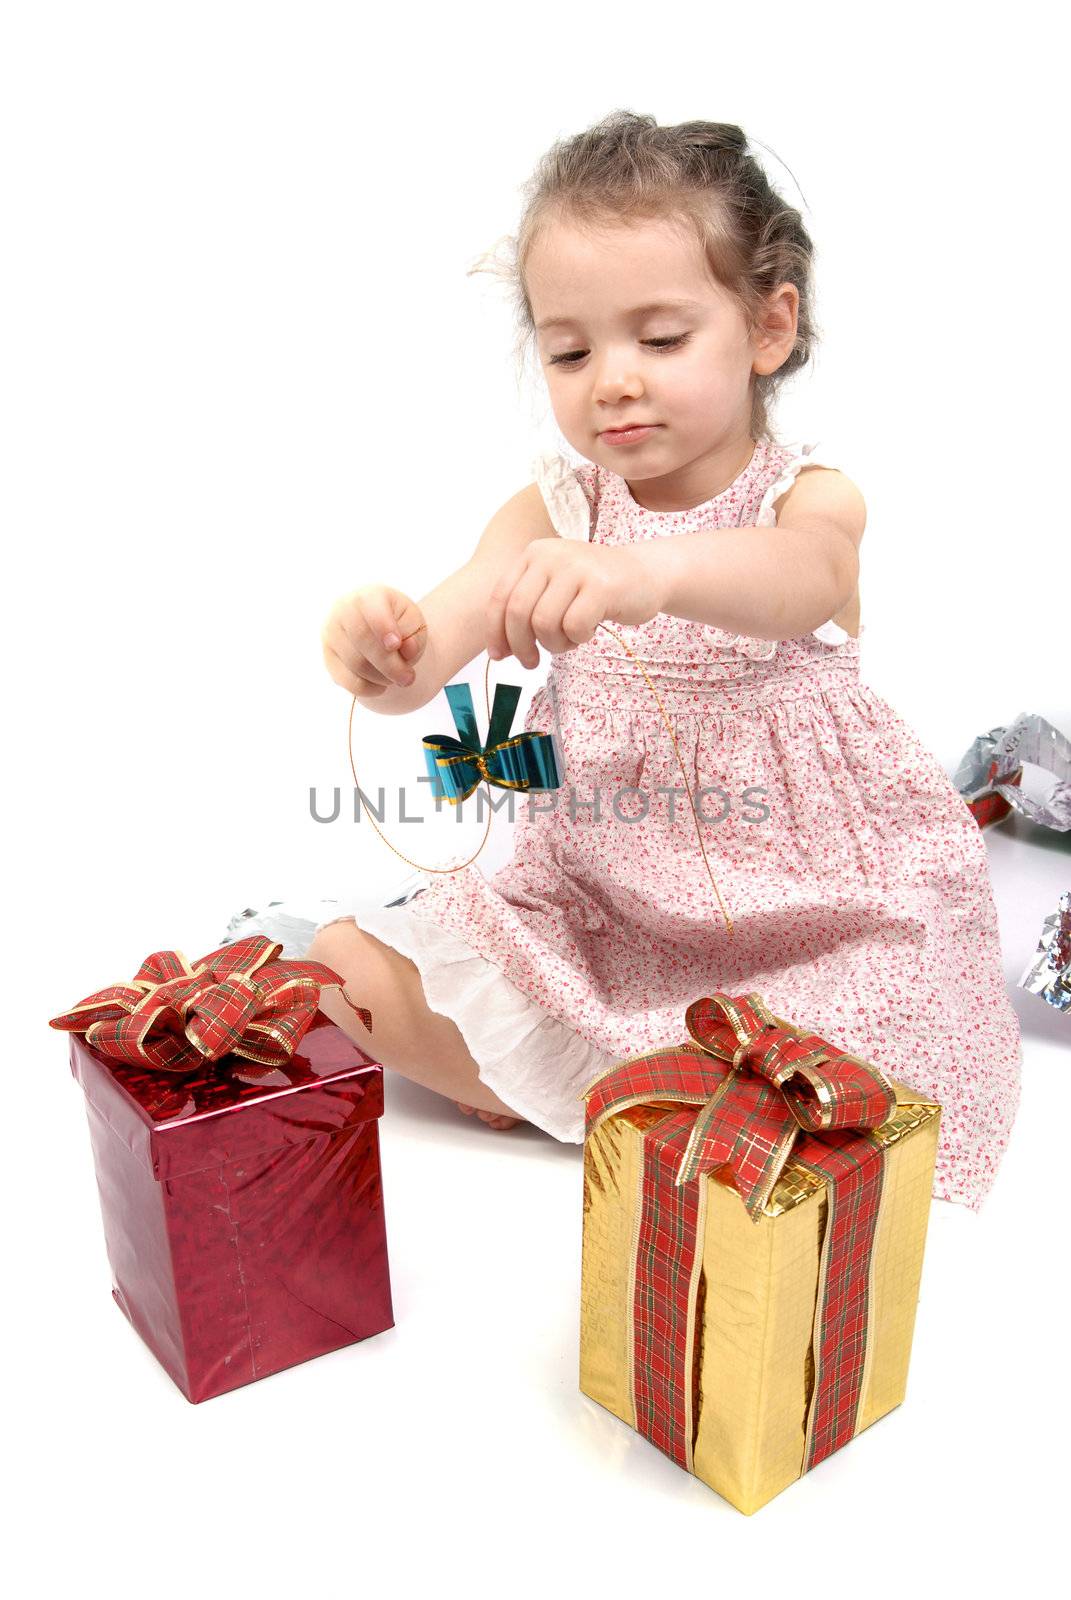 Little girl about to open her Christmas presents by cienpies